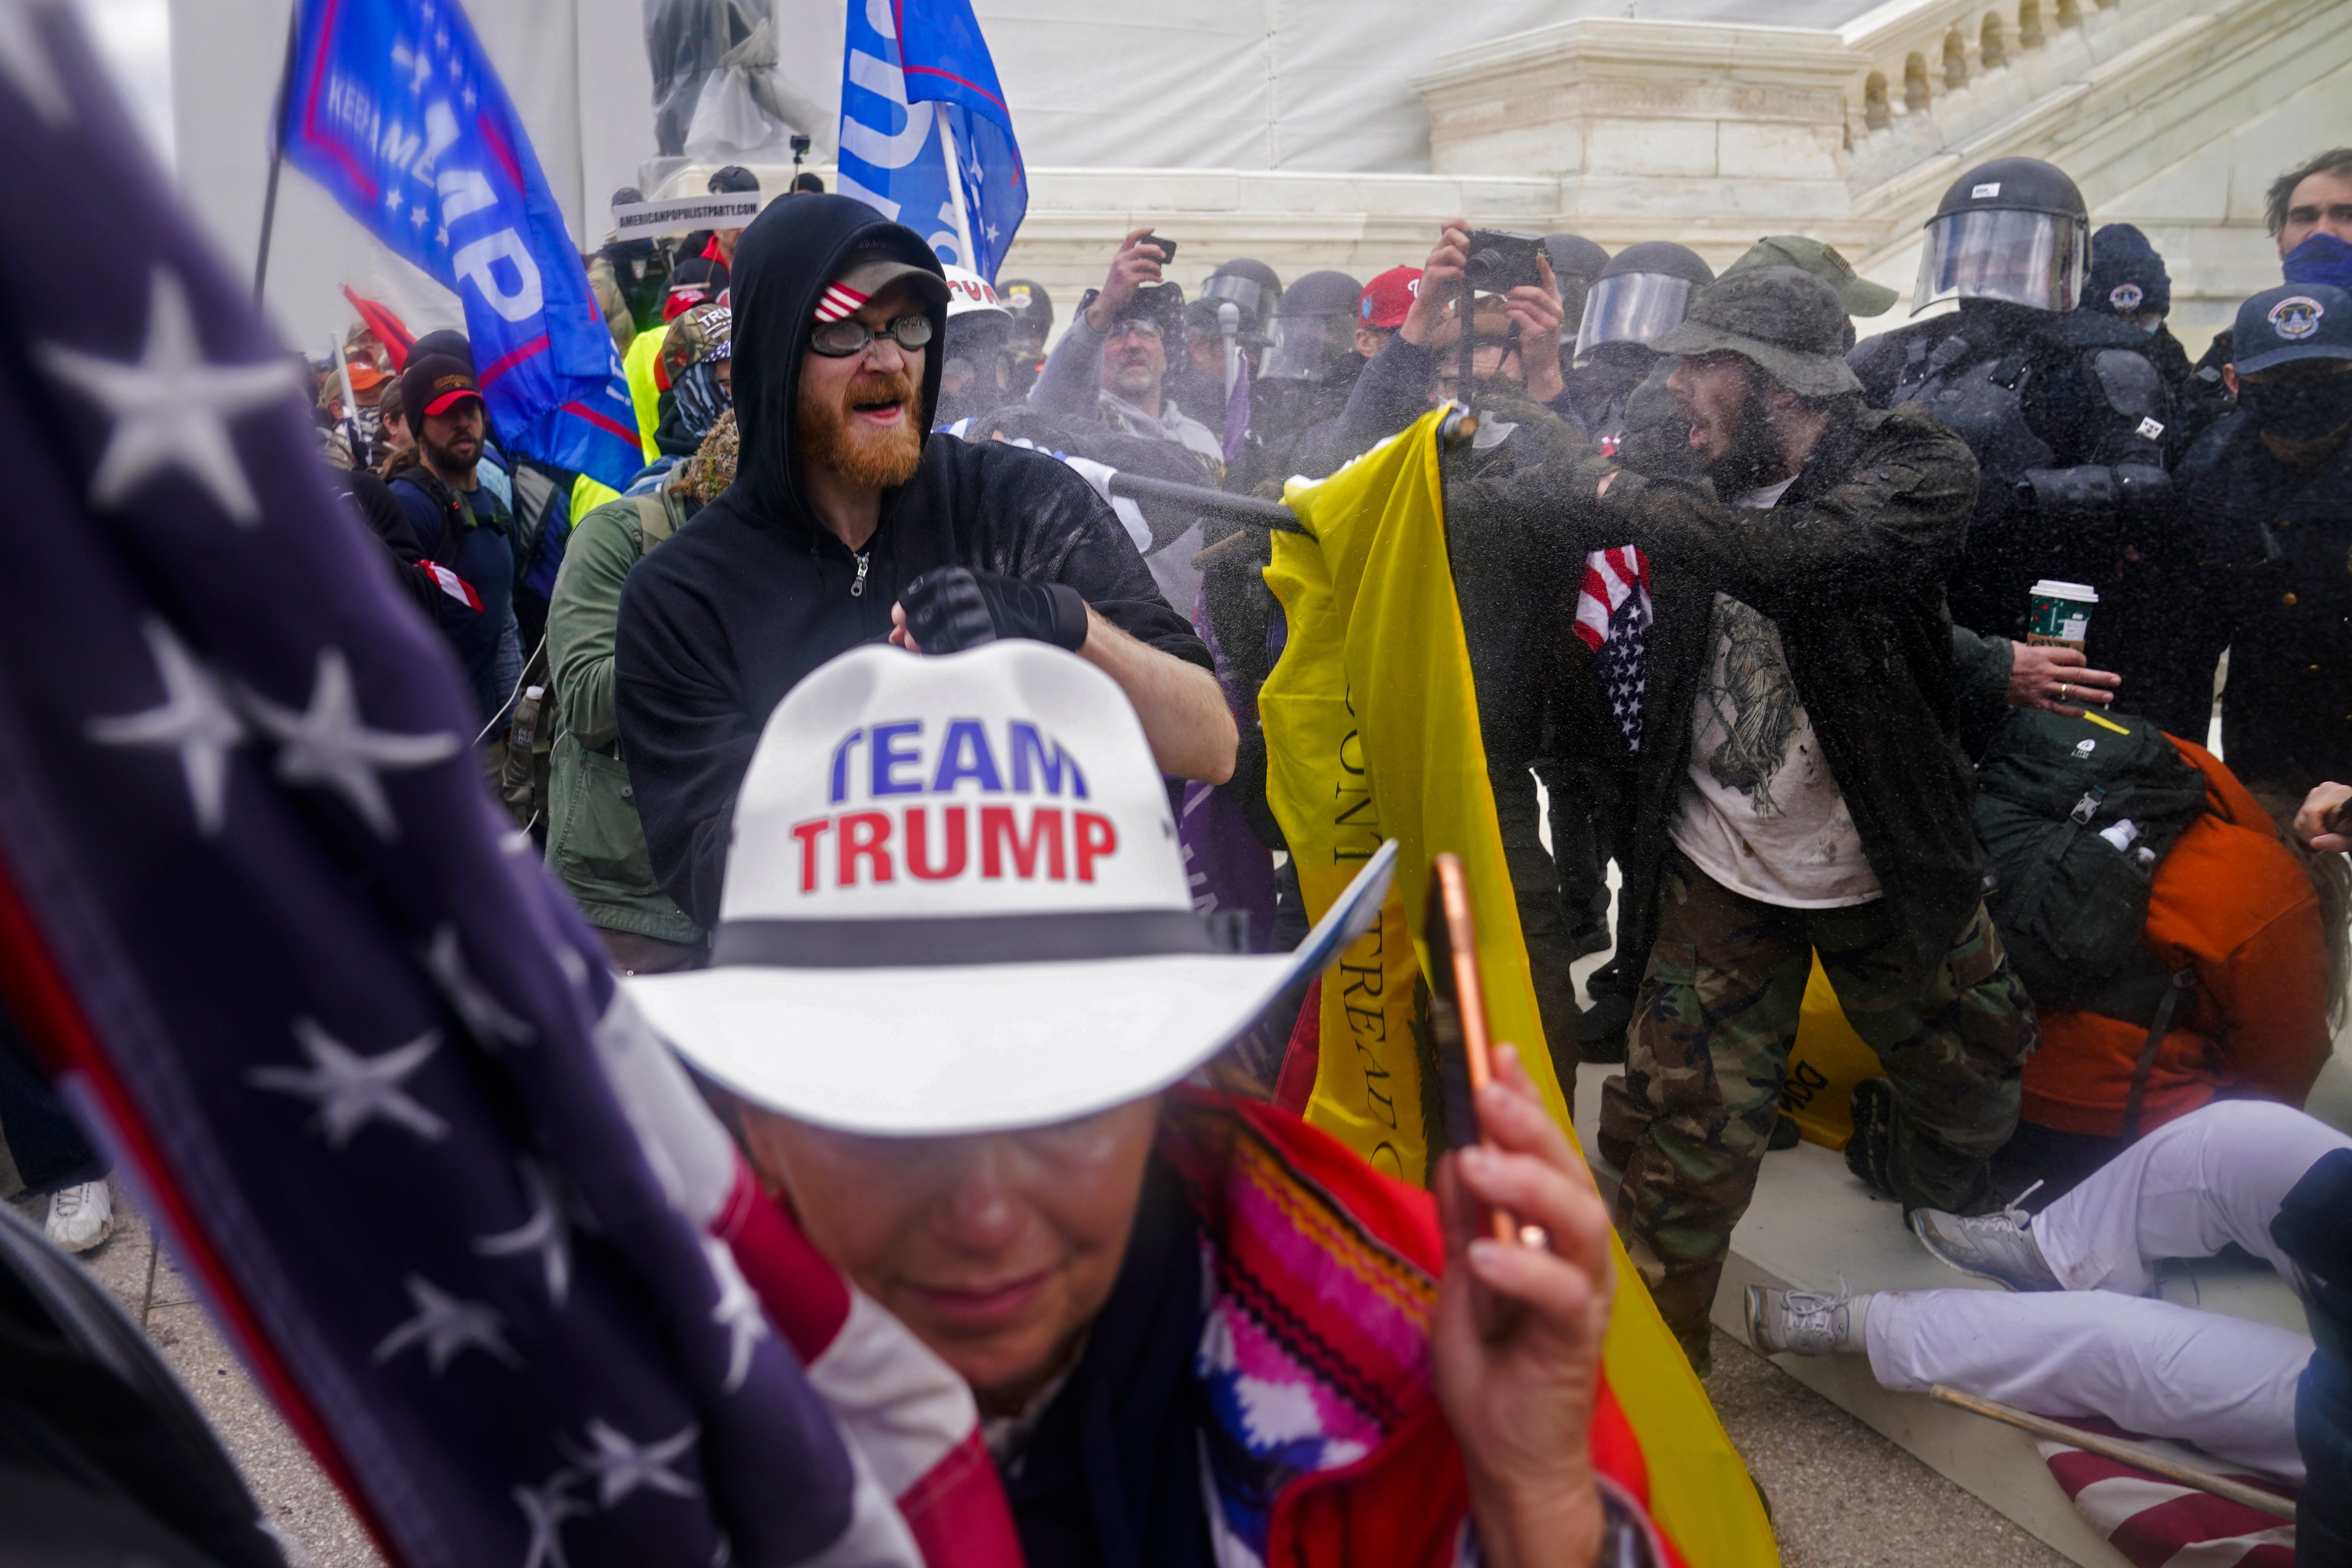 Trump supporters try to break through a police barrier at the Capitol in Washington, on 6 January, 2021, as Congress prepared to affirm President-elect Joe Biden's victory